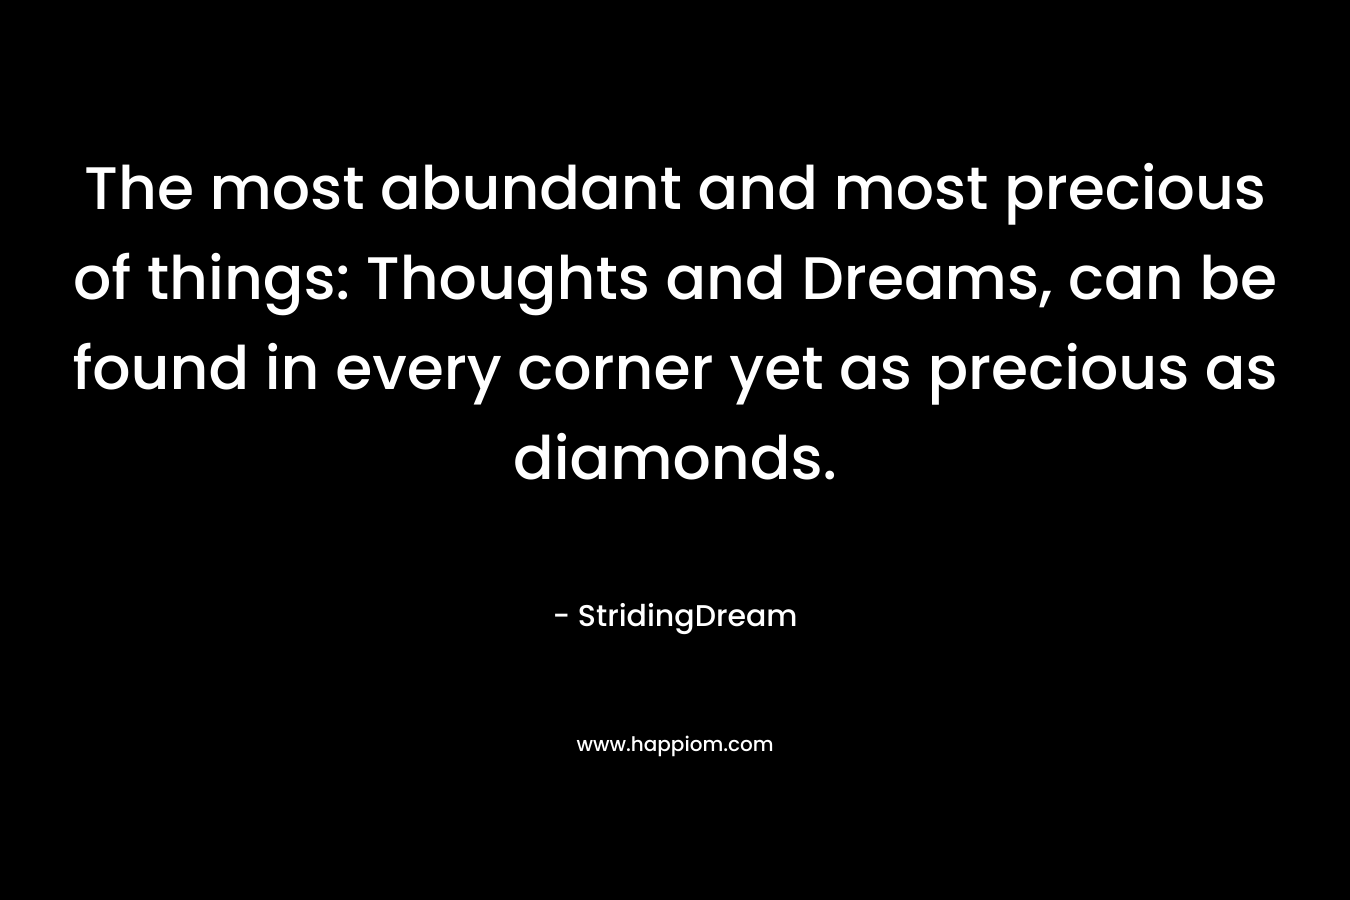 The most abundant and most precious of things: Thoughts and Dreams, can be found in every corner yet as precious as diamonds.